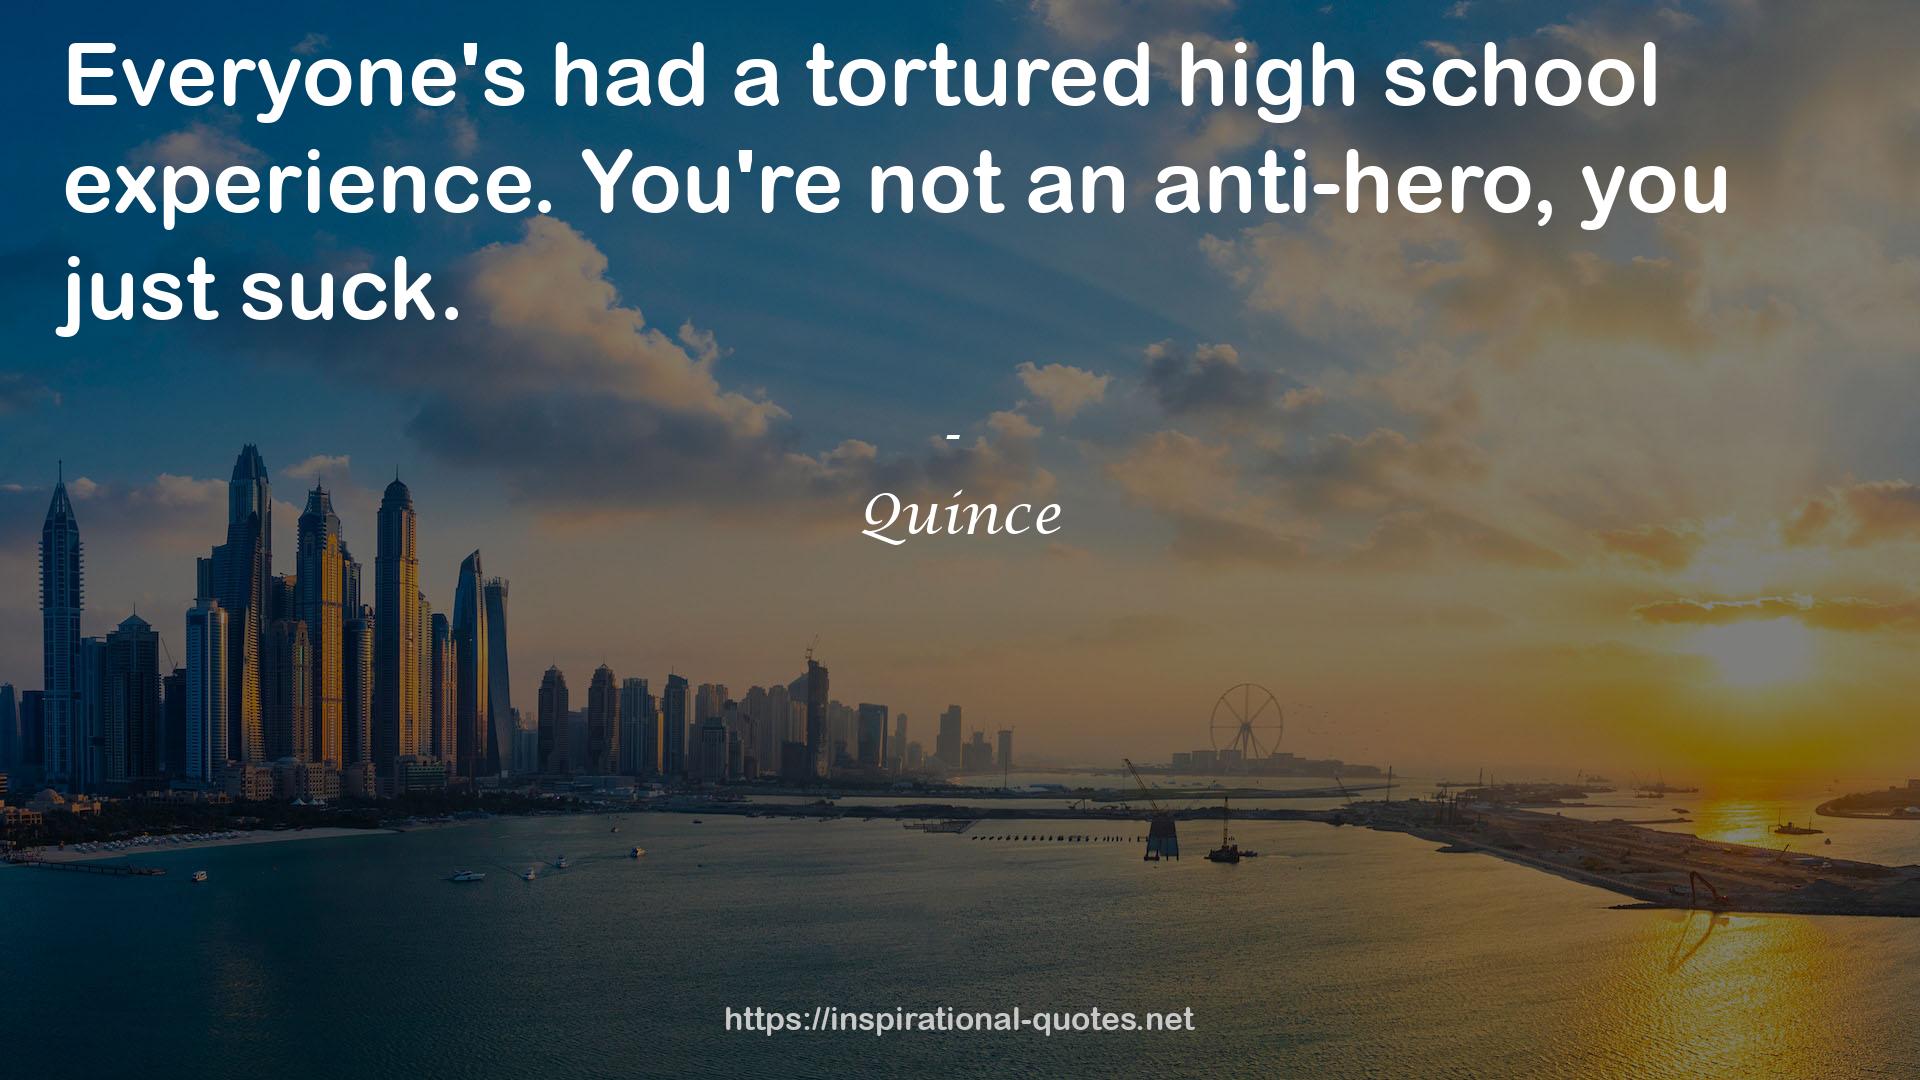 Quince QUOTES